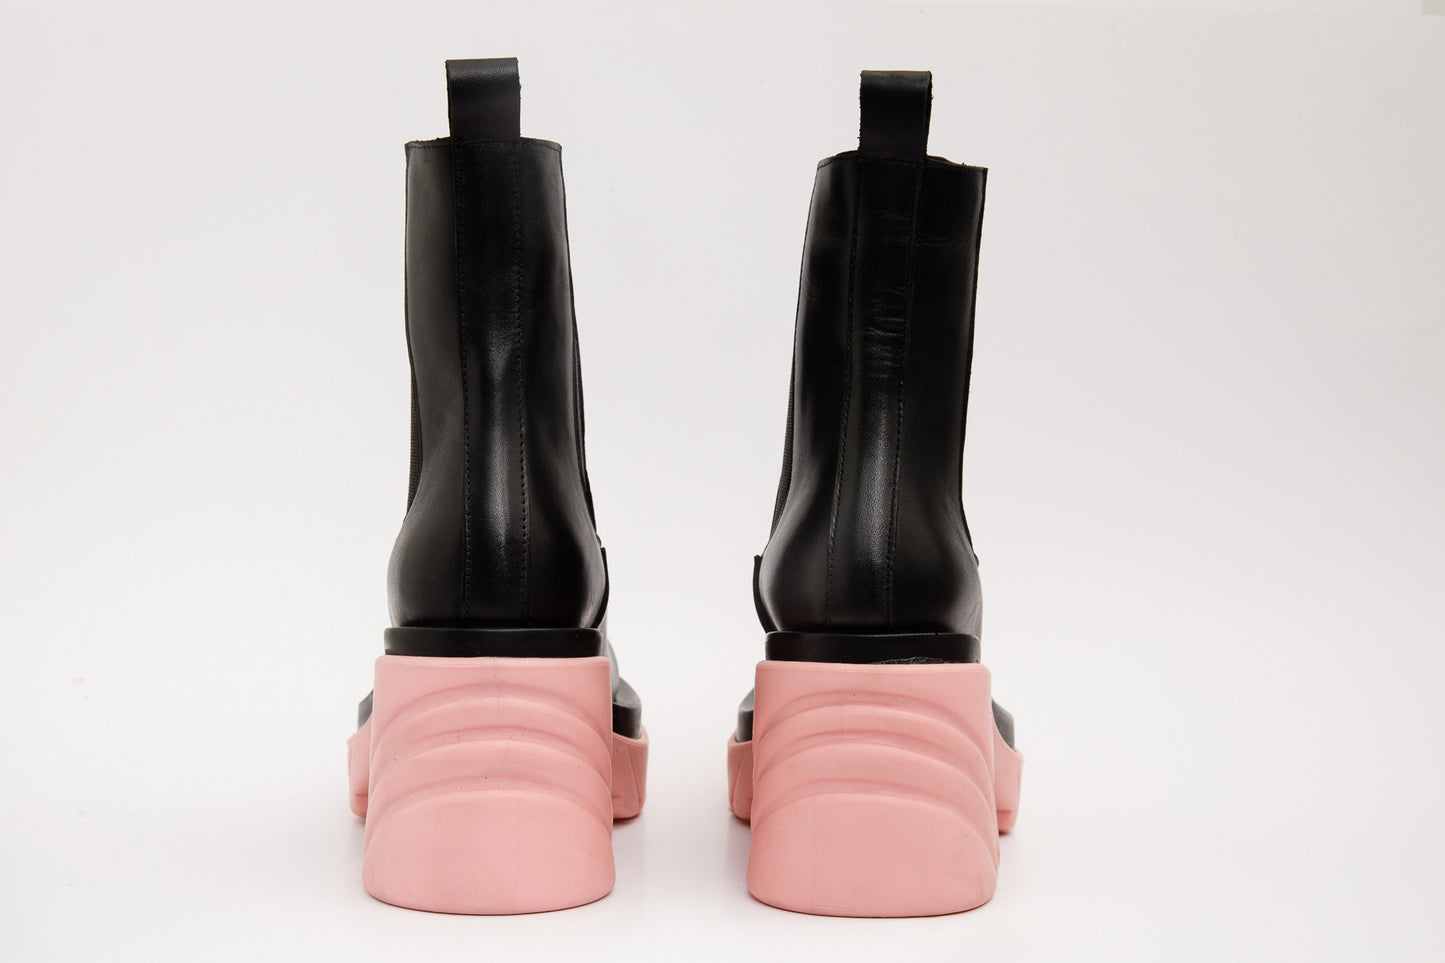 The Olga Black & Pink Leather Mid Calf Women Boot